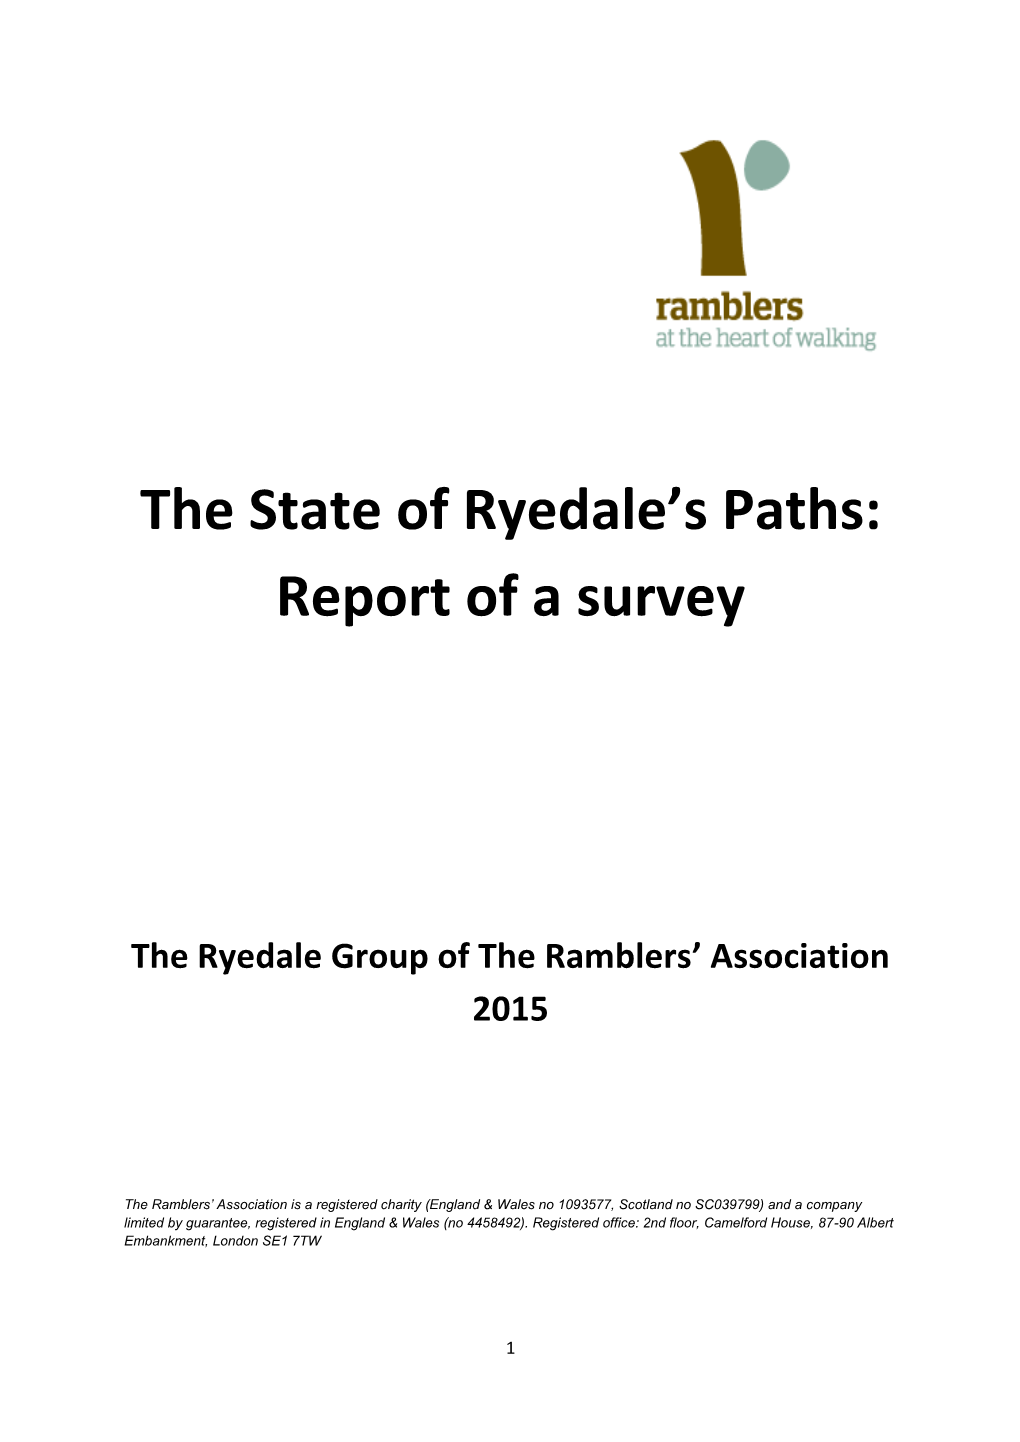 The State of Ryedale's Paths: Report of a Survey